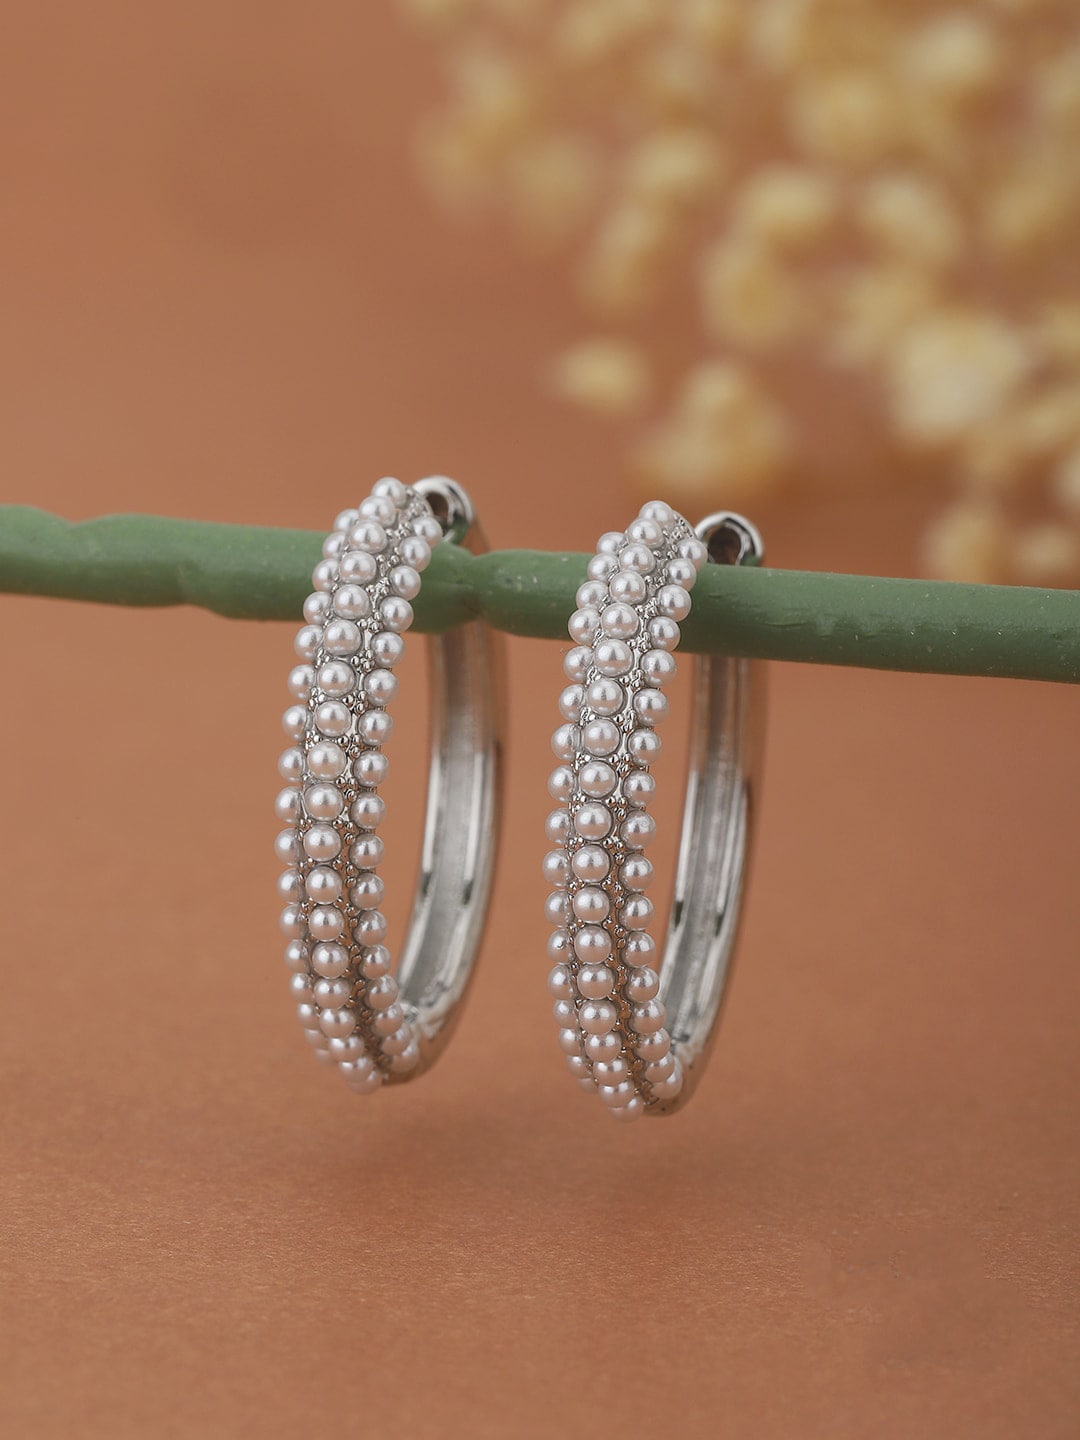 Carlton London Silver-Toned & Off-White Rhodium-Plated Beaded Circular Hoops Price in India